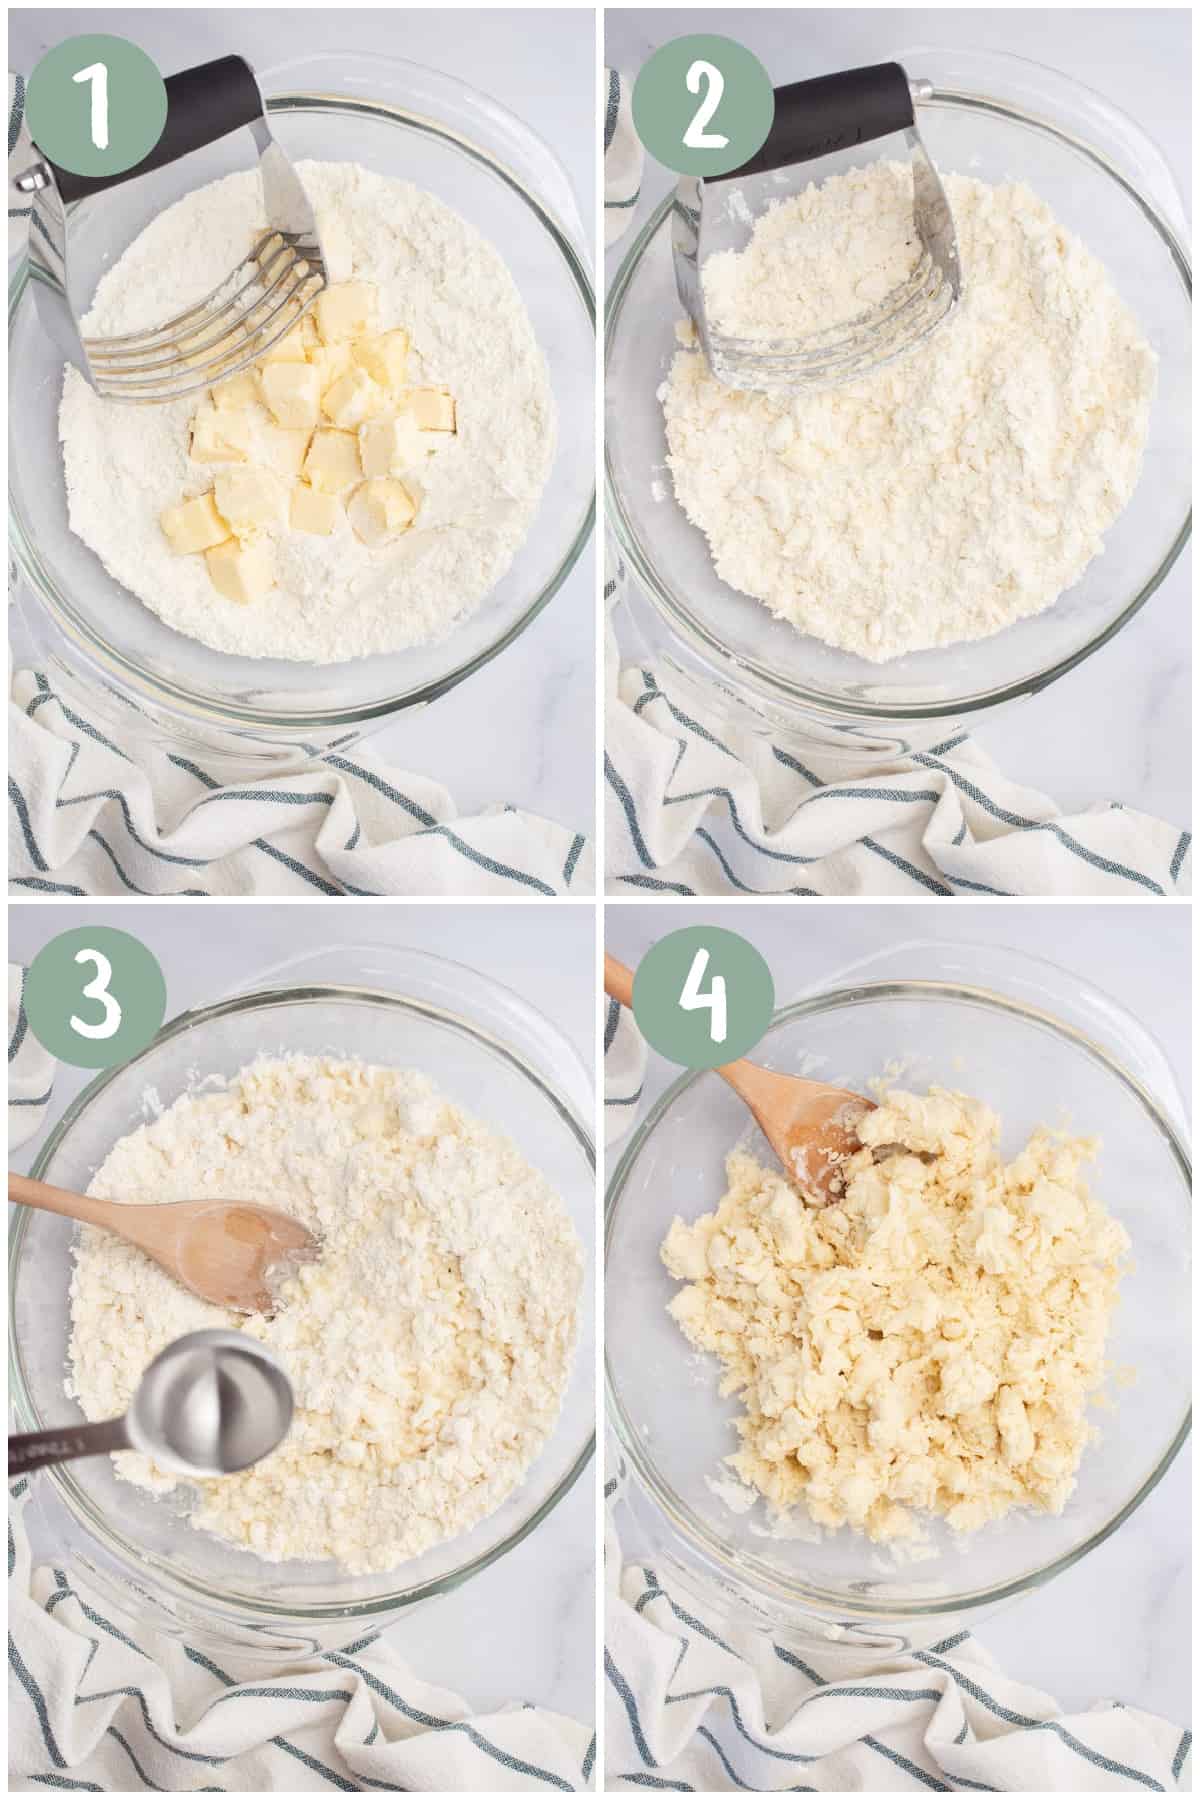 Collage of 4 steps to make pie crust. Cutting in the butter and mixing in the water.